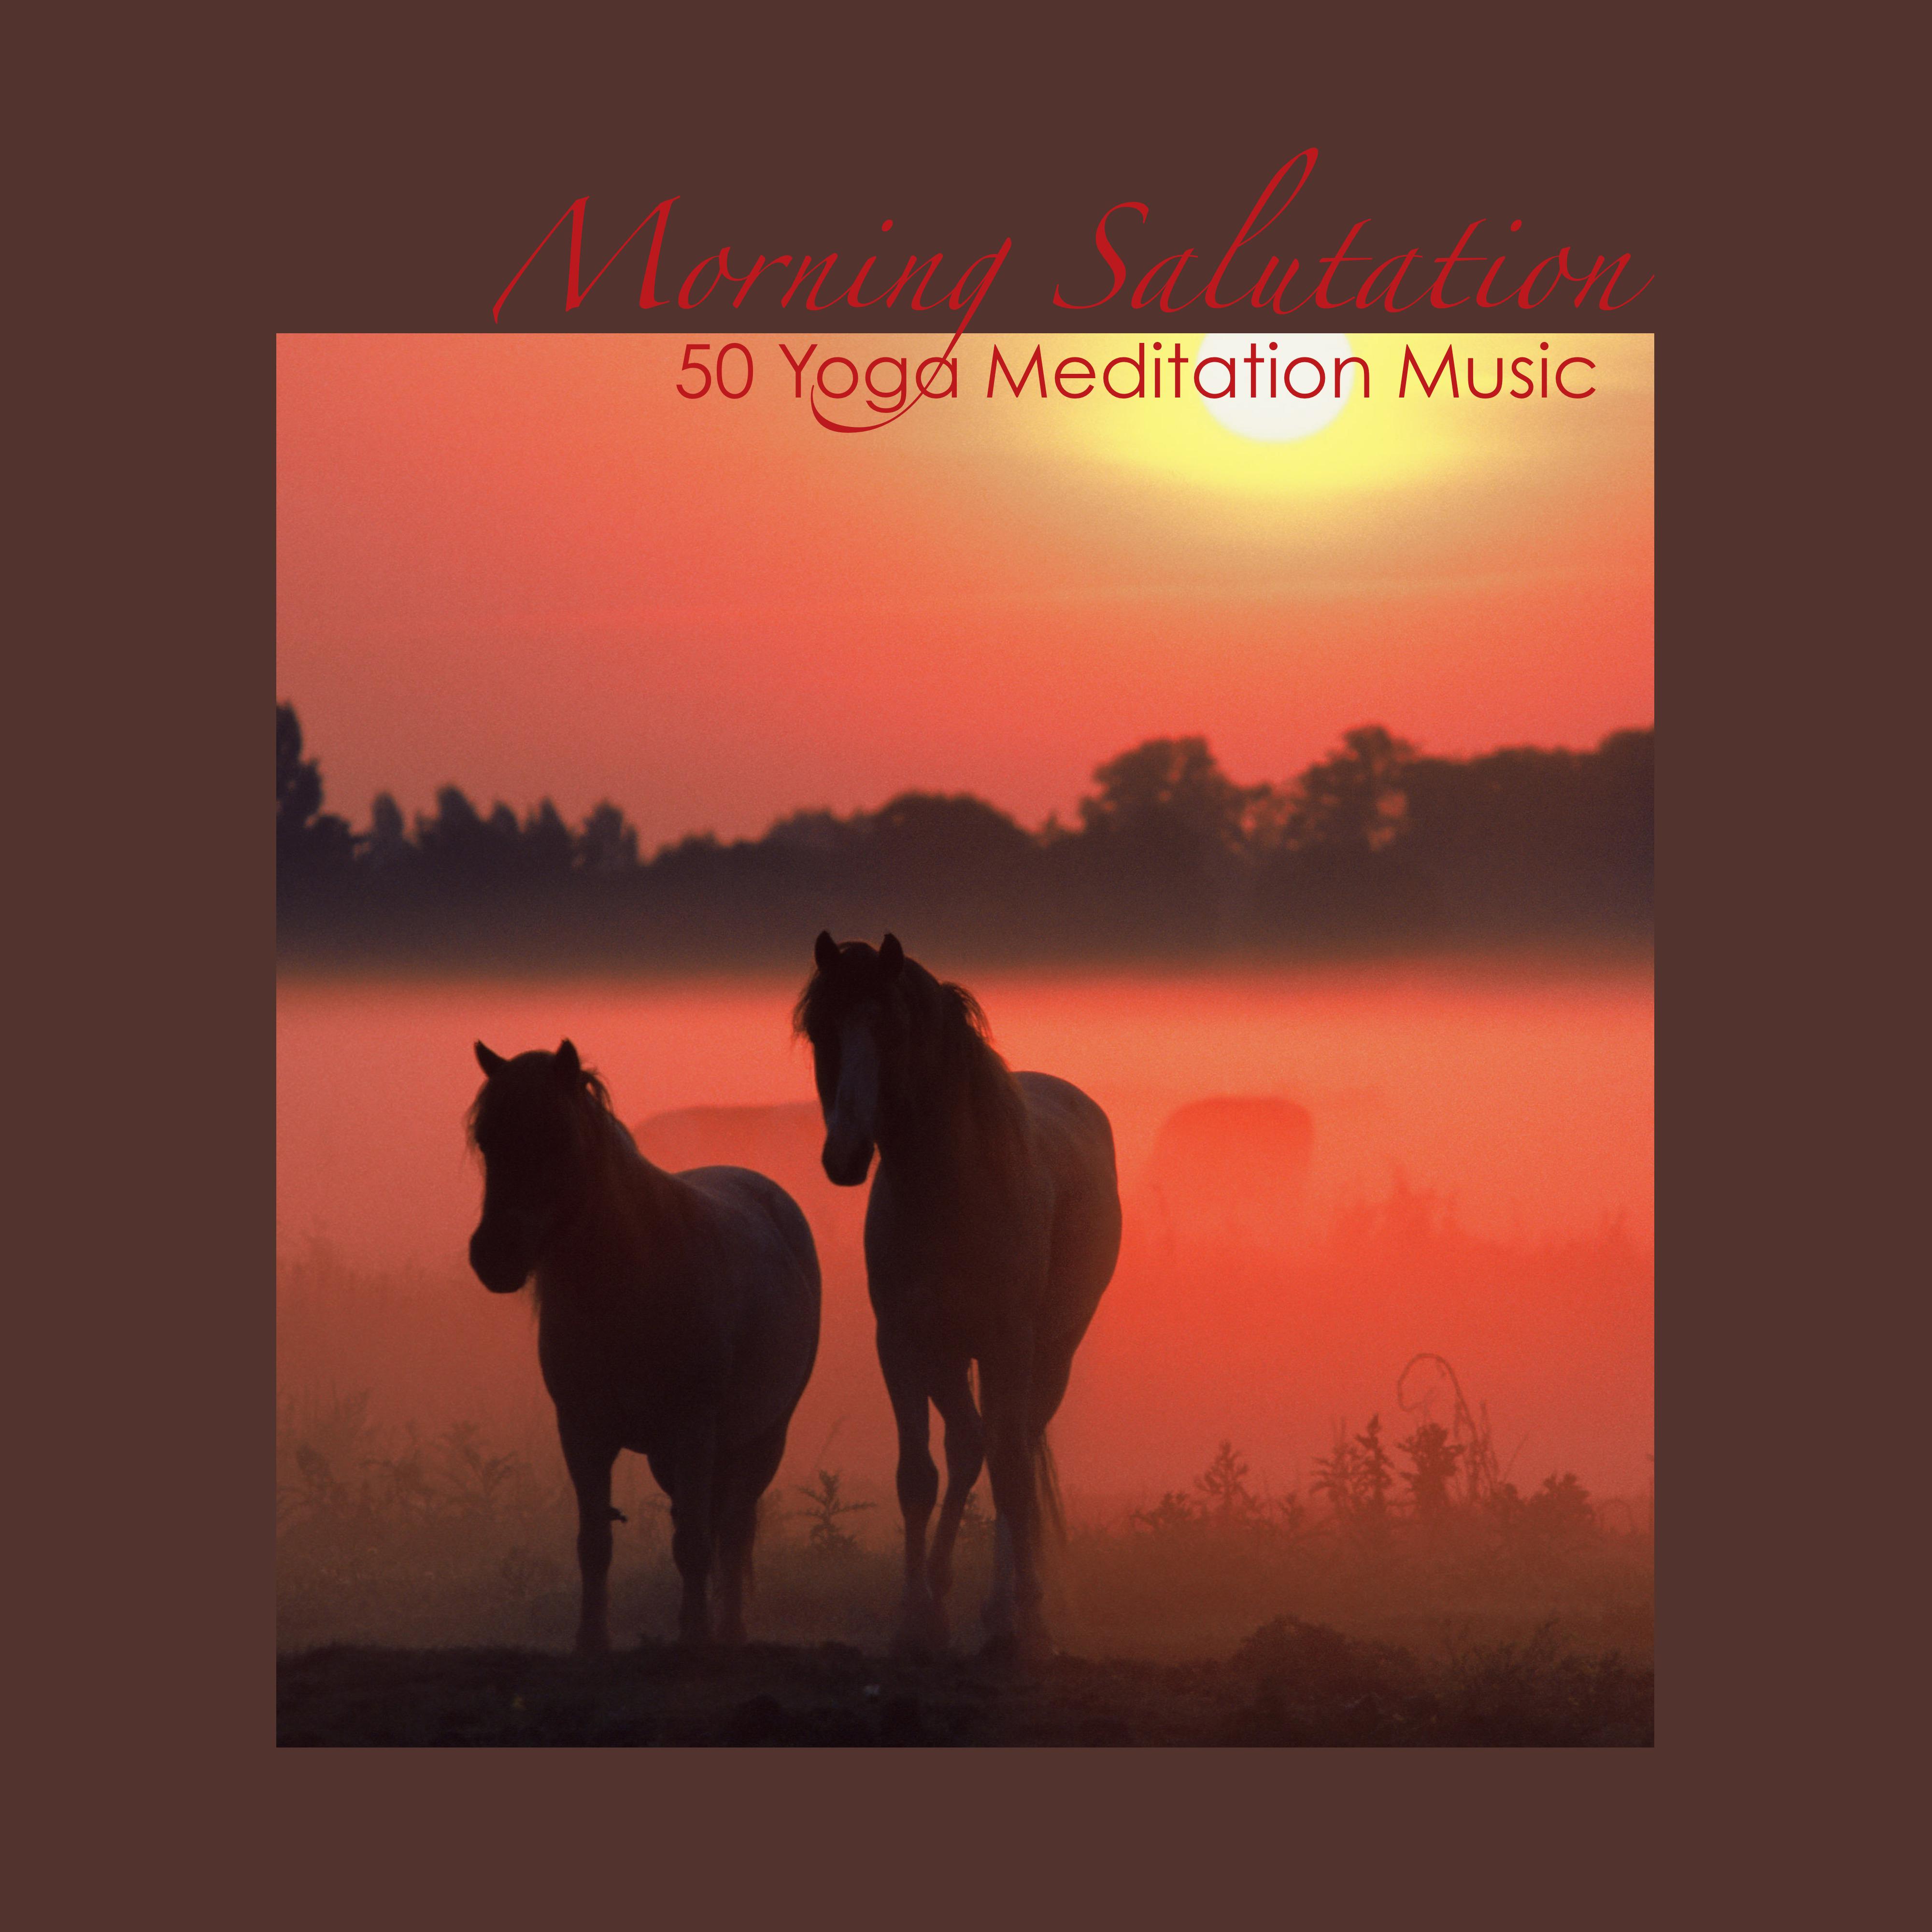 Morning Salutation - 50 Yoga Meditation Music for Relaxation Techniques and Morning Meditation